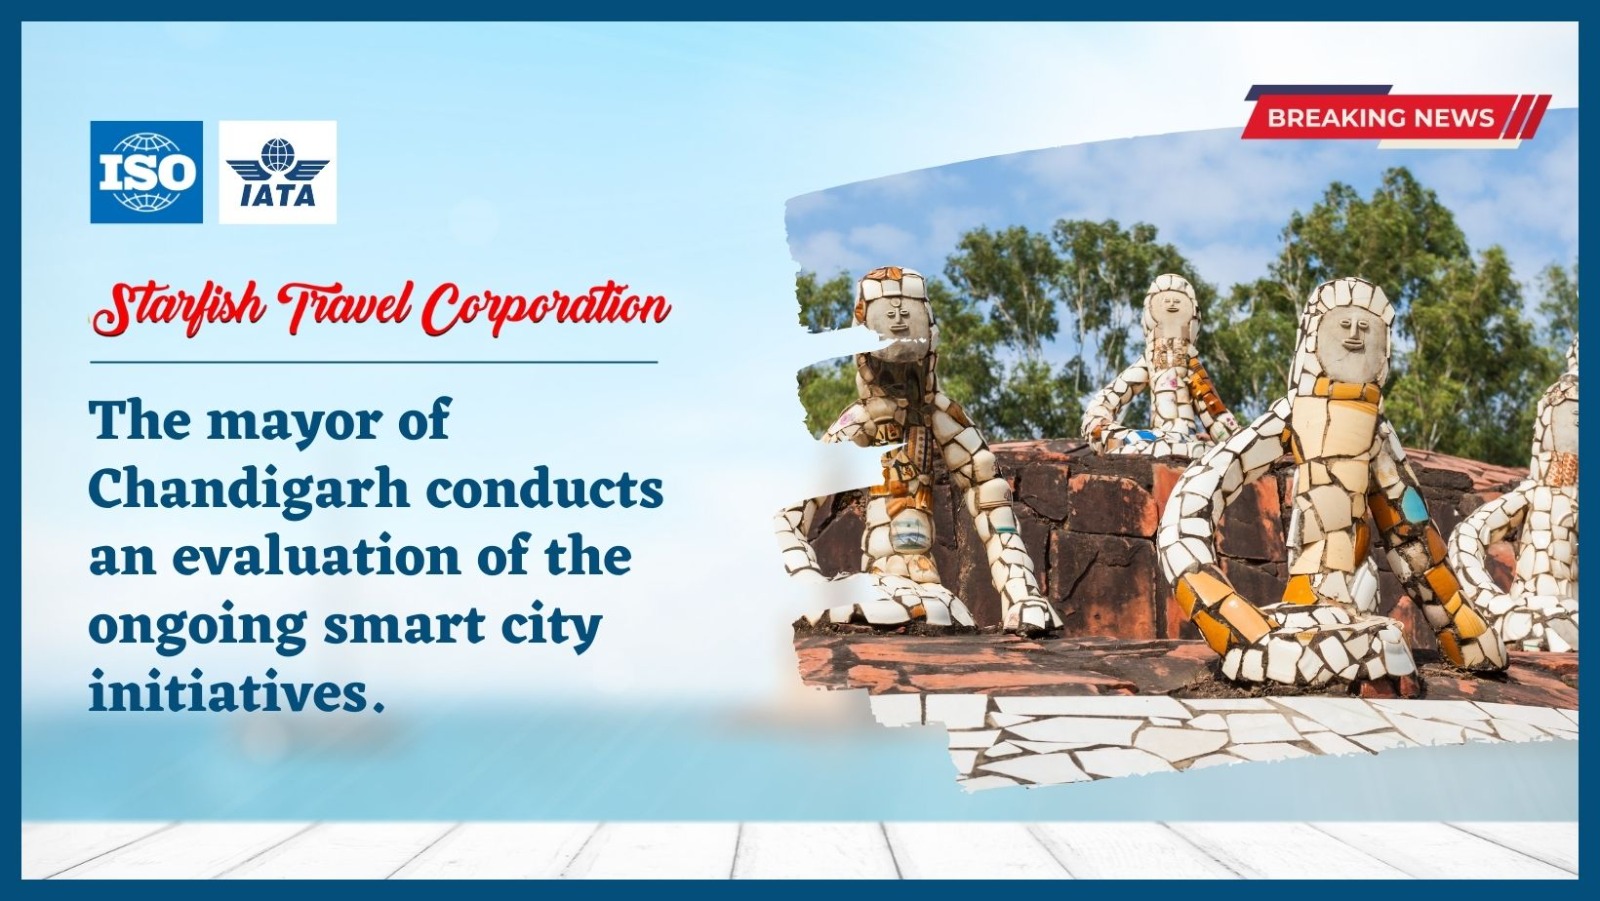 The mayor of Chandigarh conducts an evaluation of the ongoing smart city initiatives.